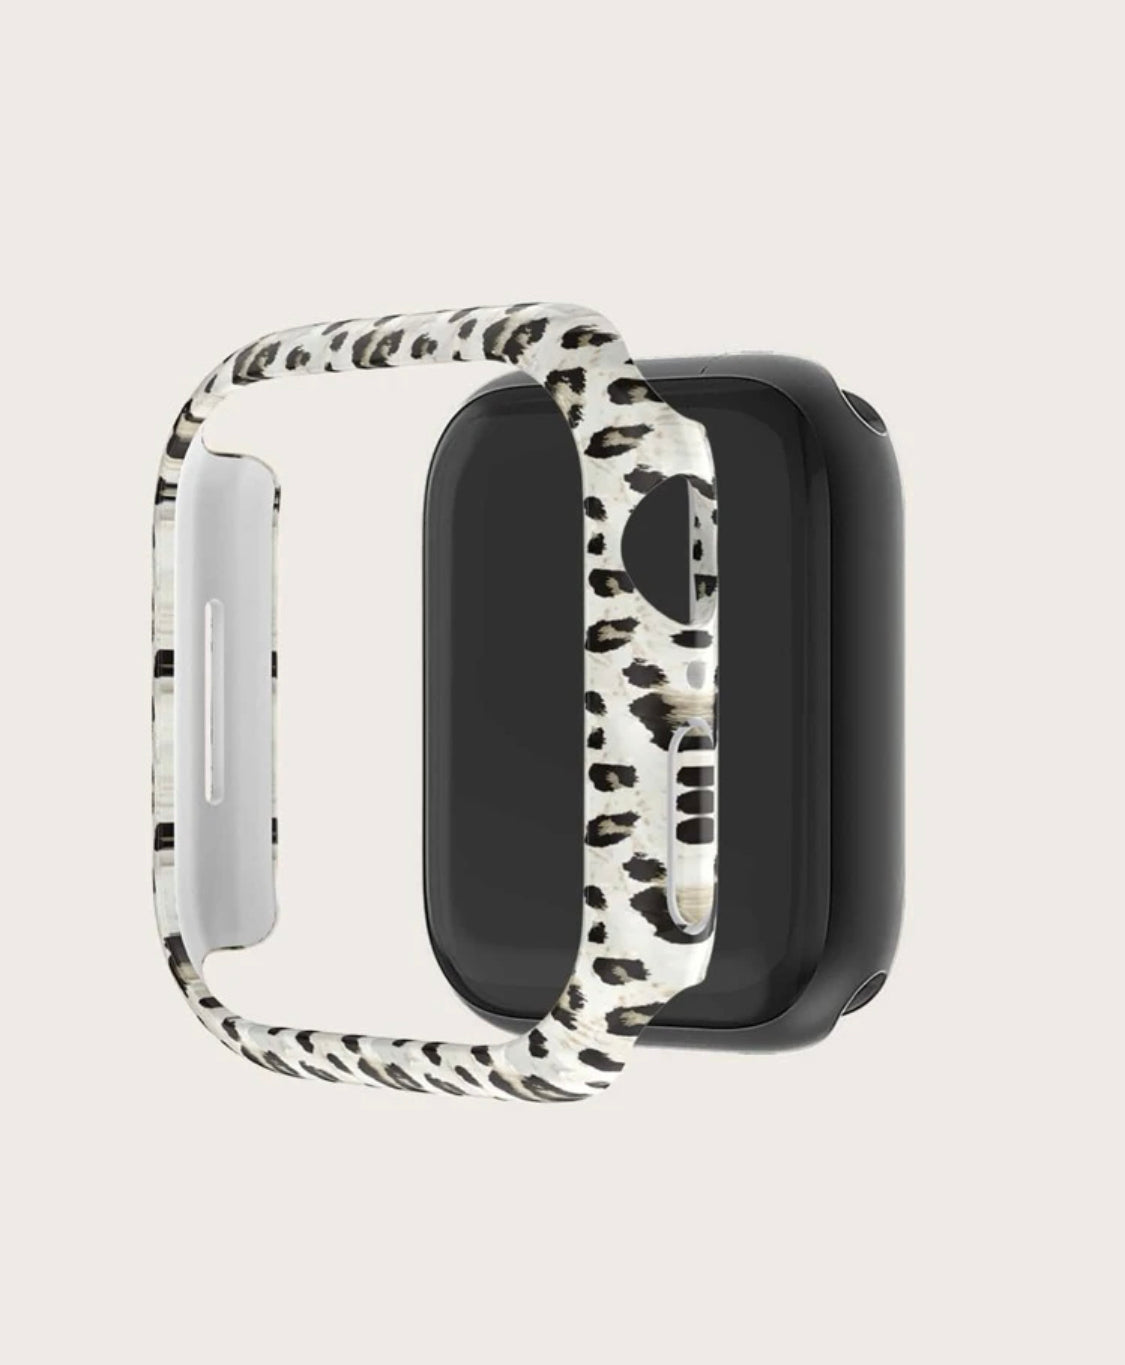 Leopard Watch Face Cover